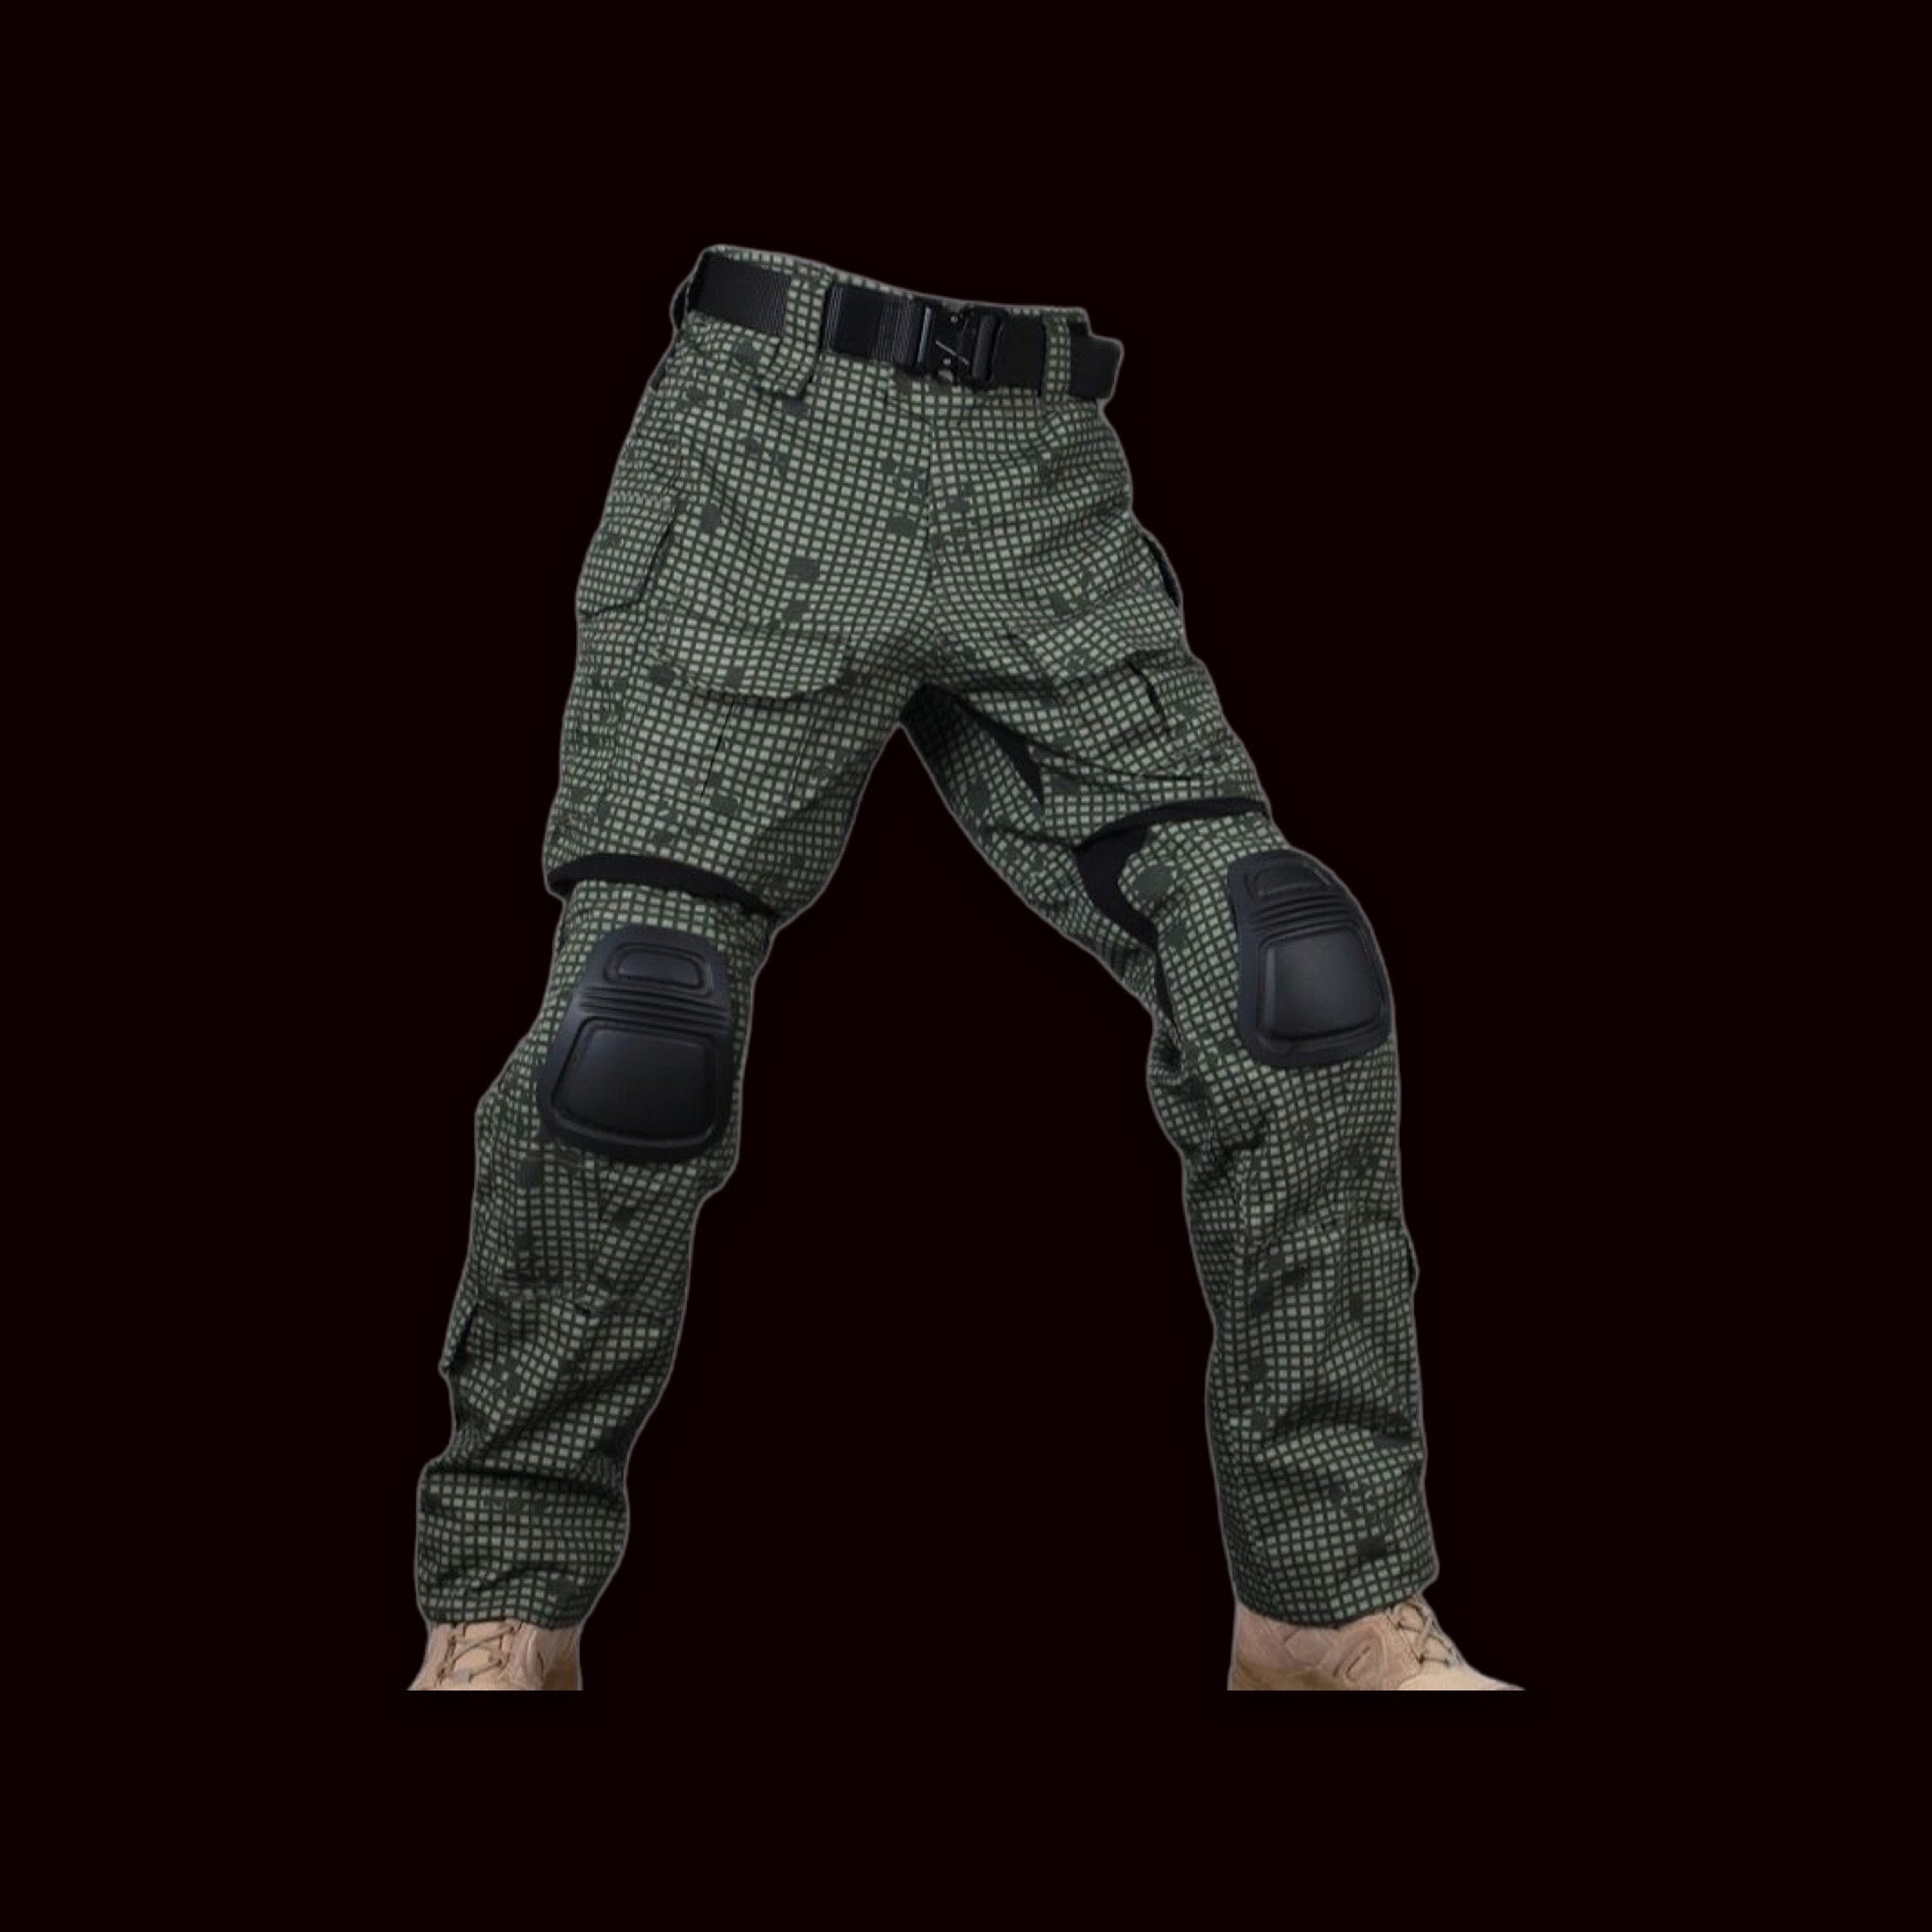 Midwest Supply Dessert Camo Army Pants